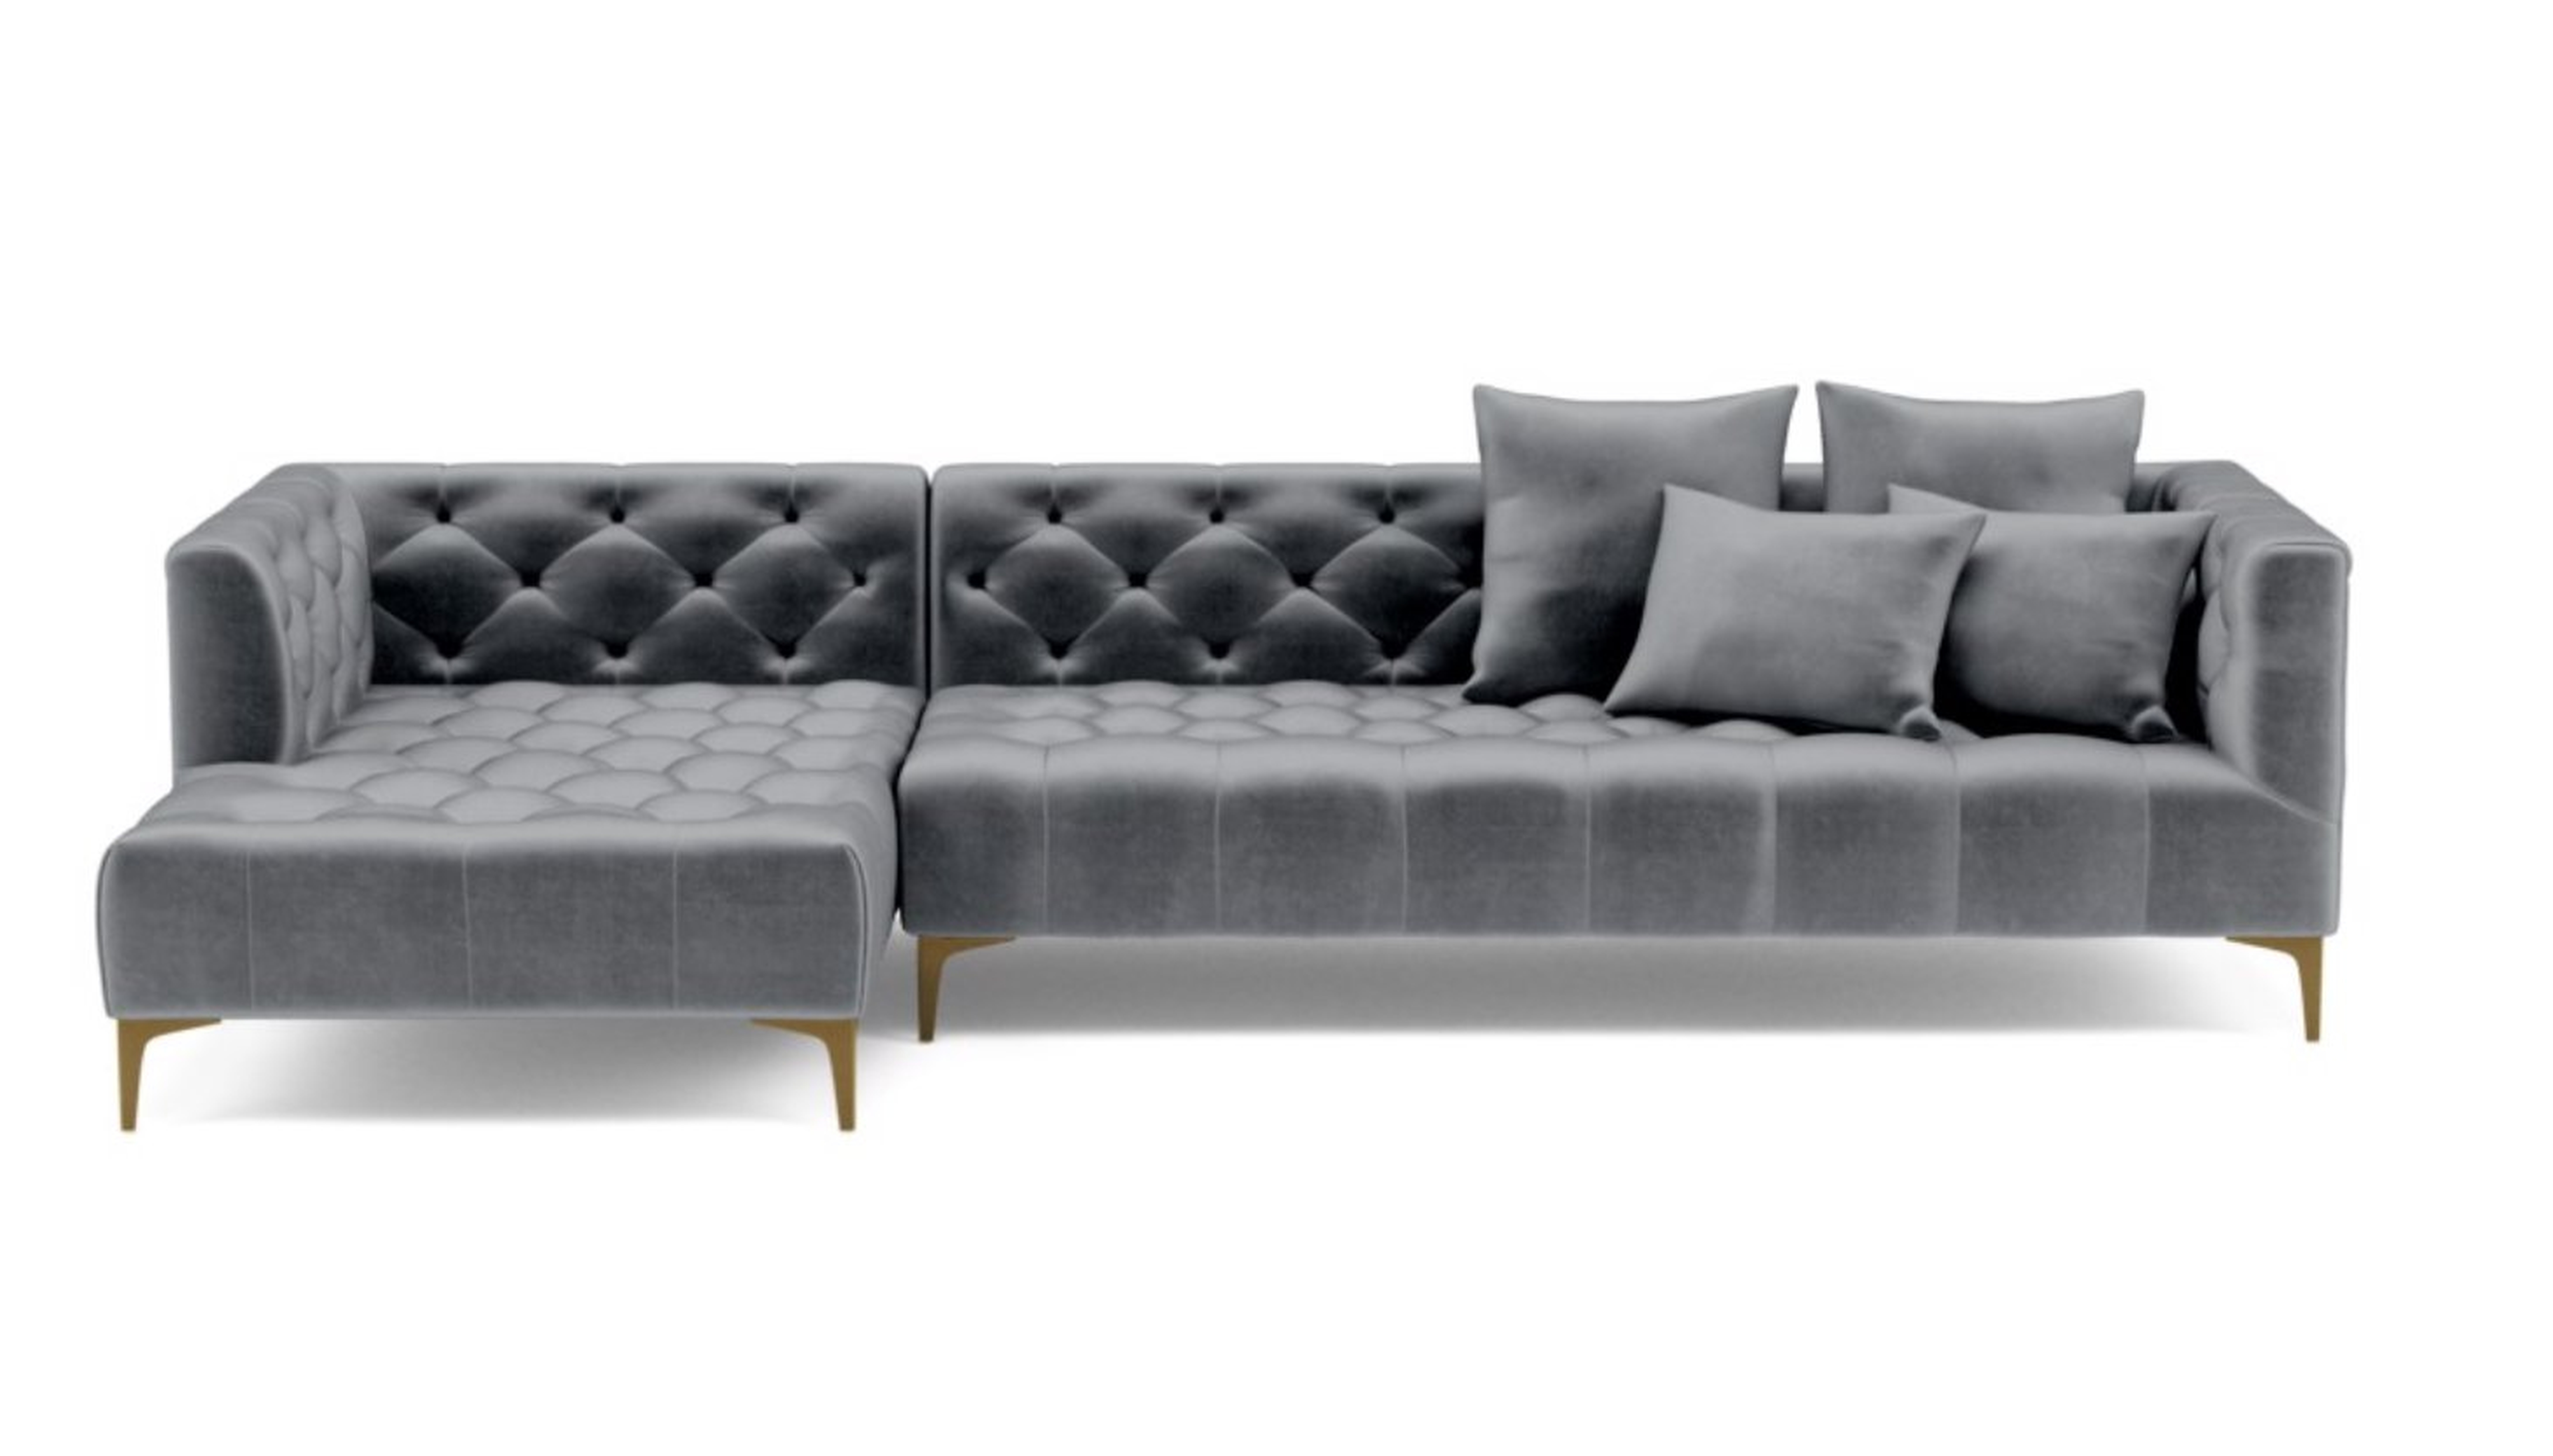 MS. CHESTERFIELD Sectional Sofa with Left Chaise - Elephant Mod Velvet - Brass Plated Legs - Interior Define